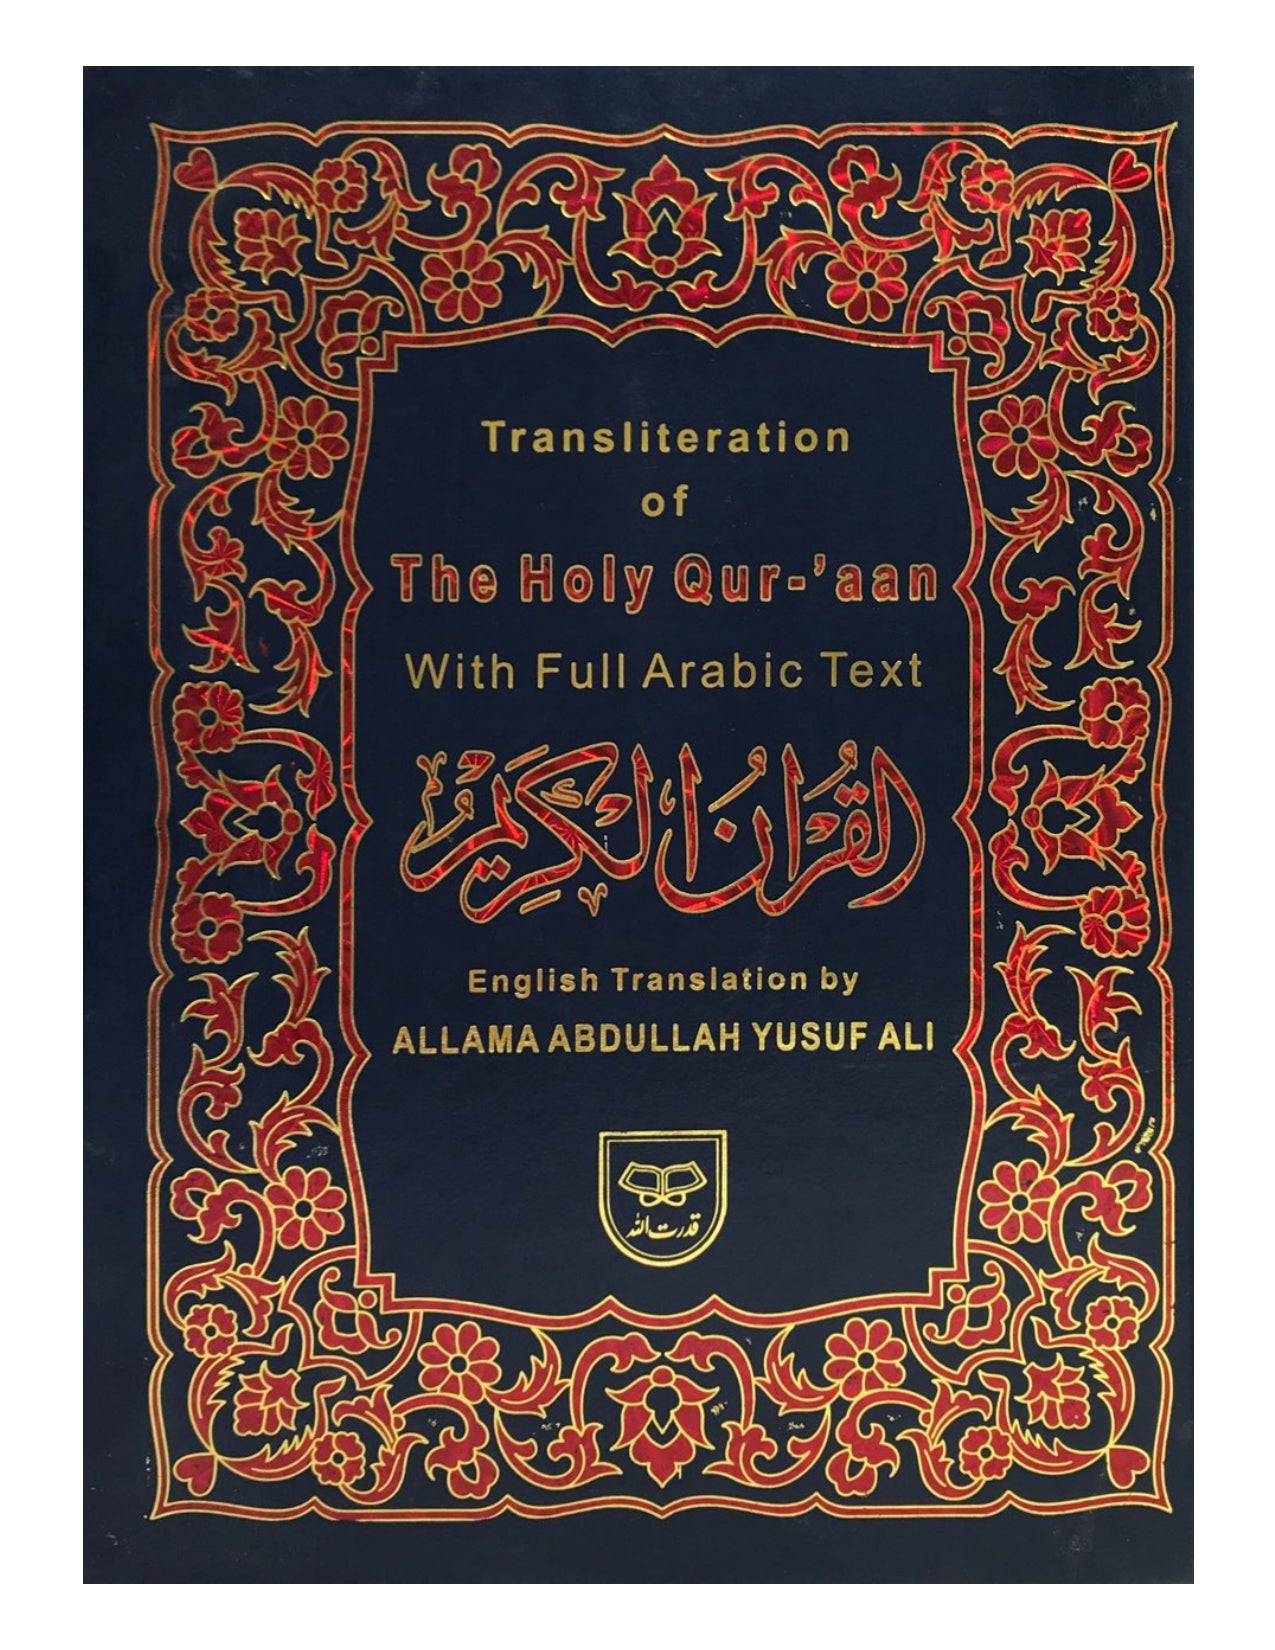 Noble Quran English Translation and Transliteration (Roman Script) by Abdullah Yousuf (R.A.) - aljareer online